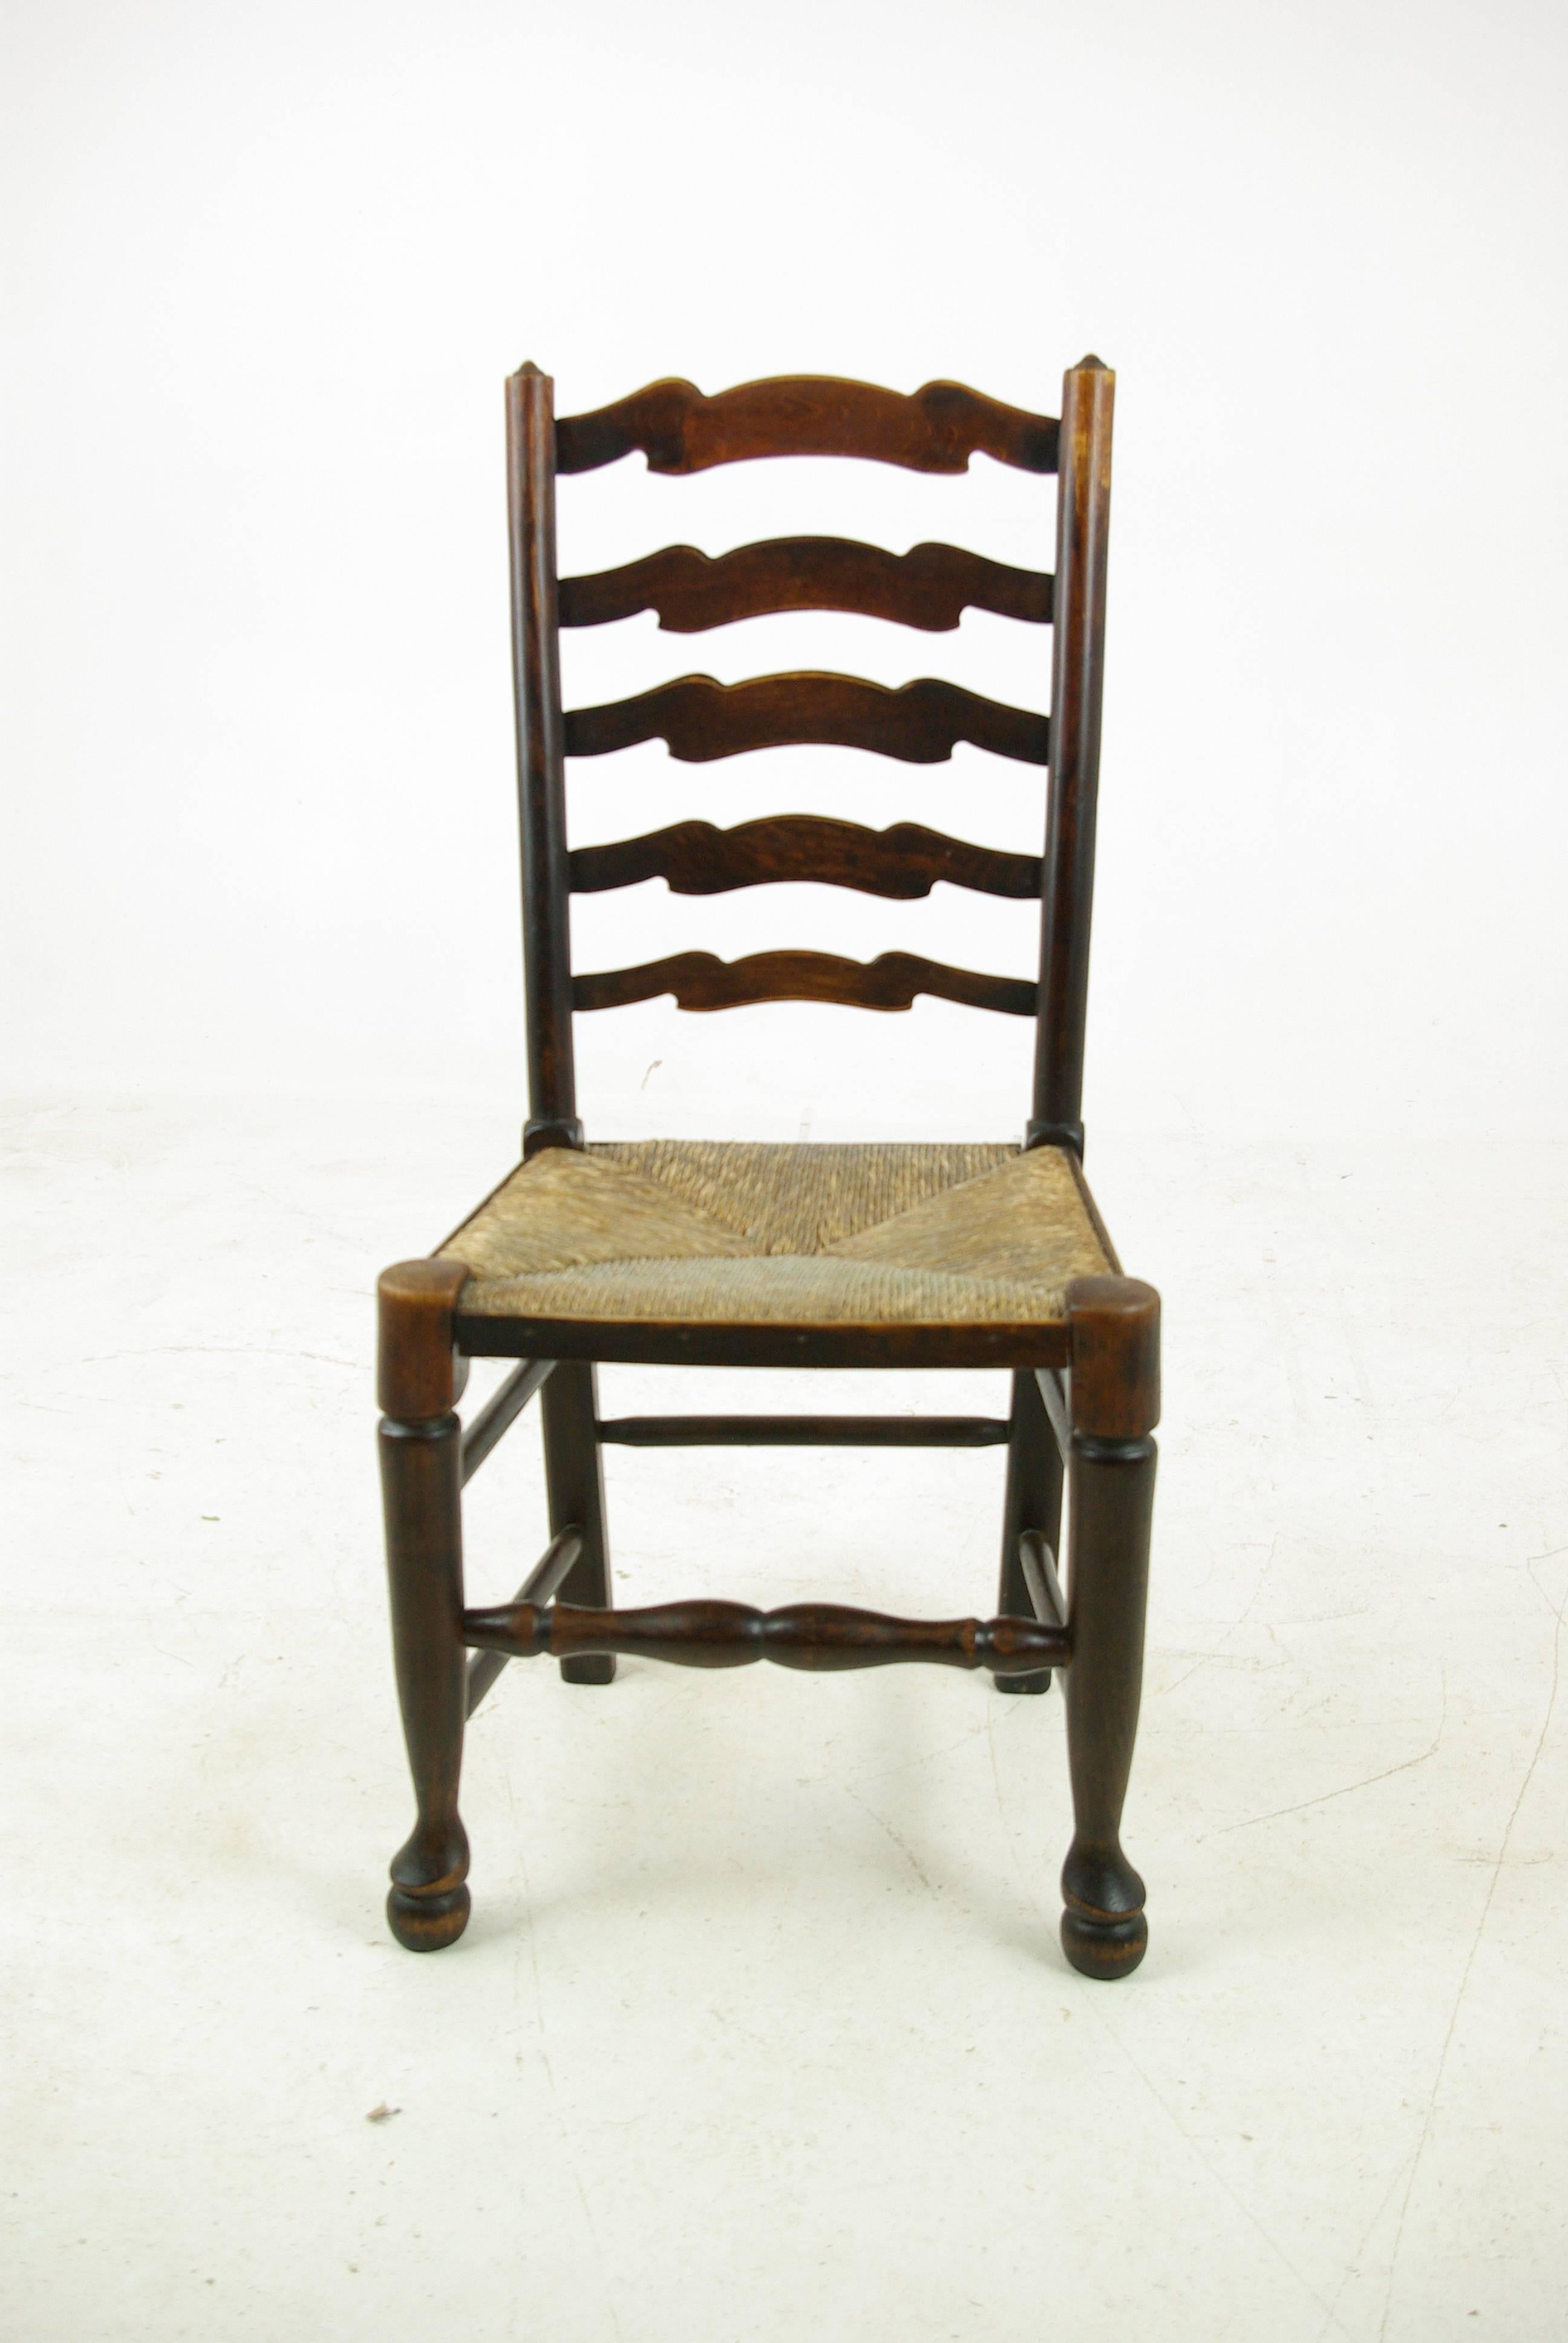 Hand-Crafted Antique Dining Chairs, Rush Chairs, Ladder Back Chairs, 1930s, B1014  REDUCED!!!